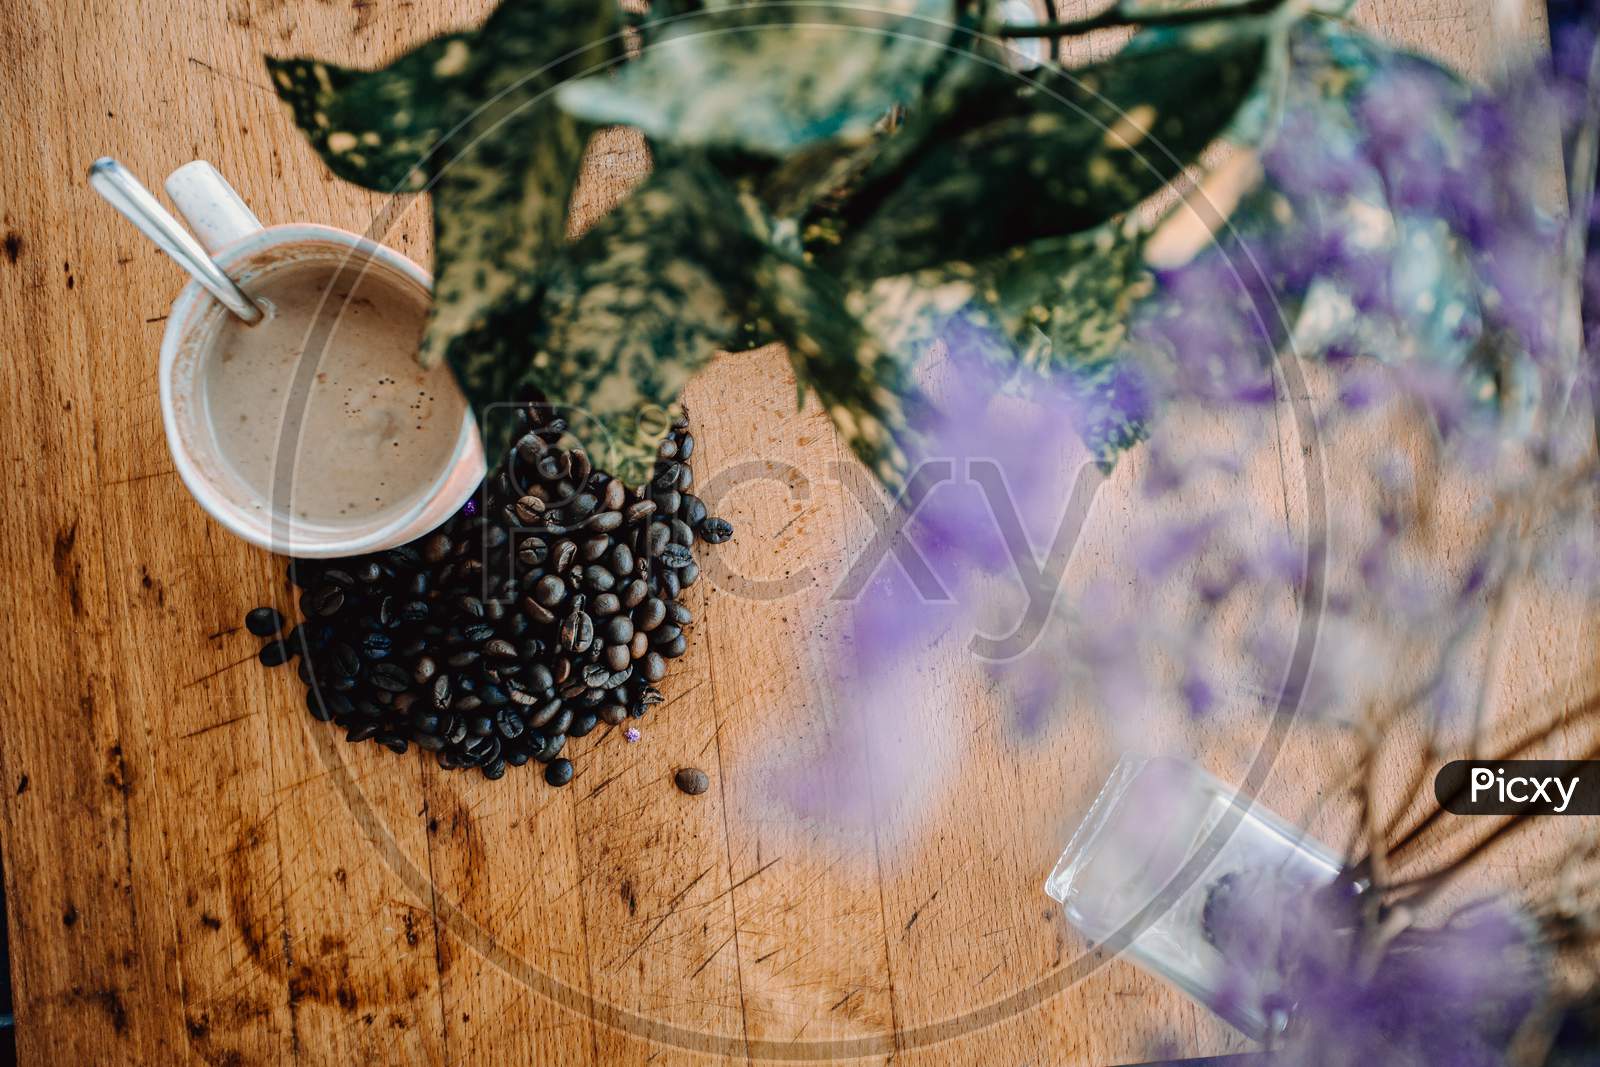 Vintage Flat Lay Of A Cup Of Coffee With Grains Of Coffee Near It And A Plant Decorating Over A Wood Table